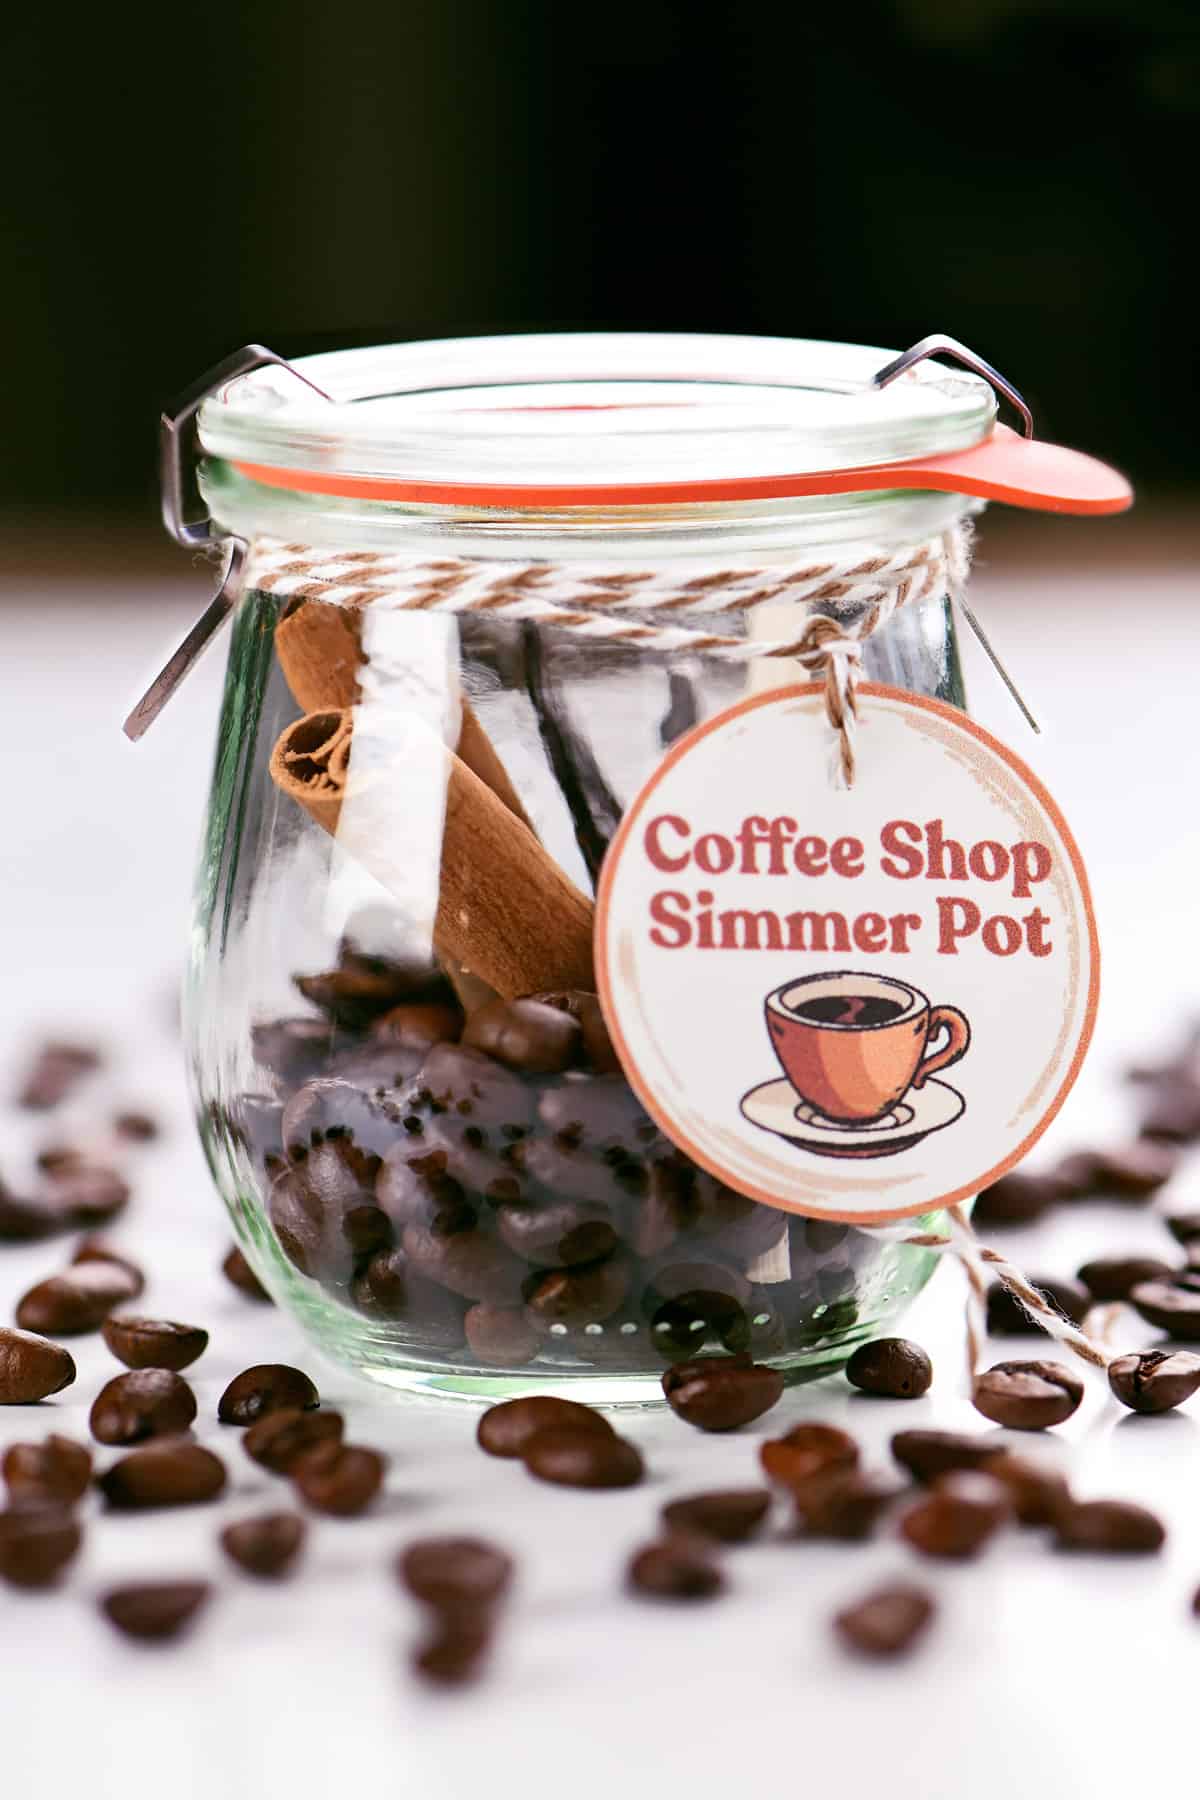 Coffee Shop simmer pot ingredients in a glass jar with a custom label.